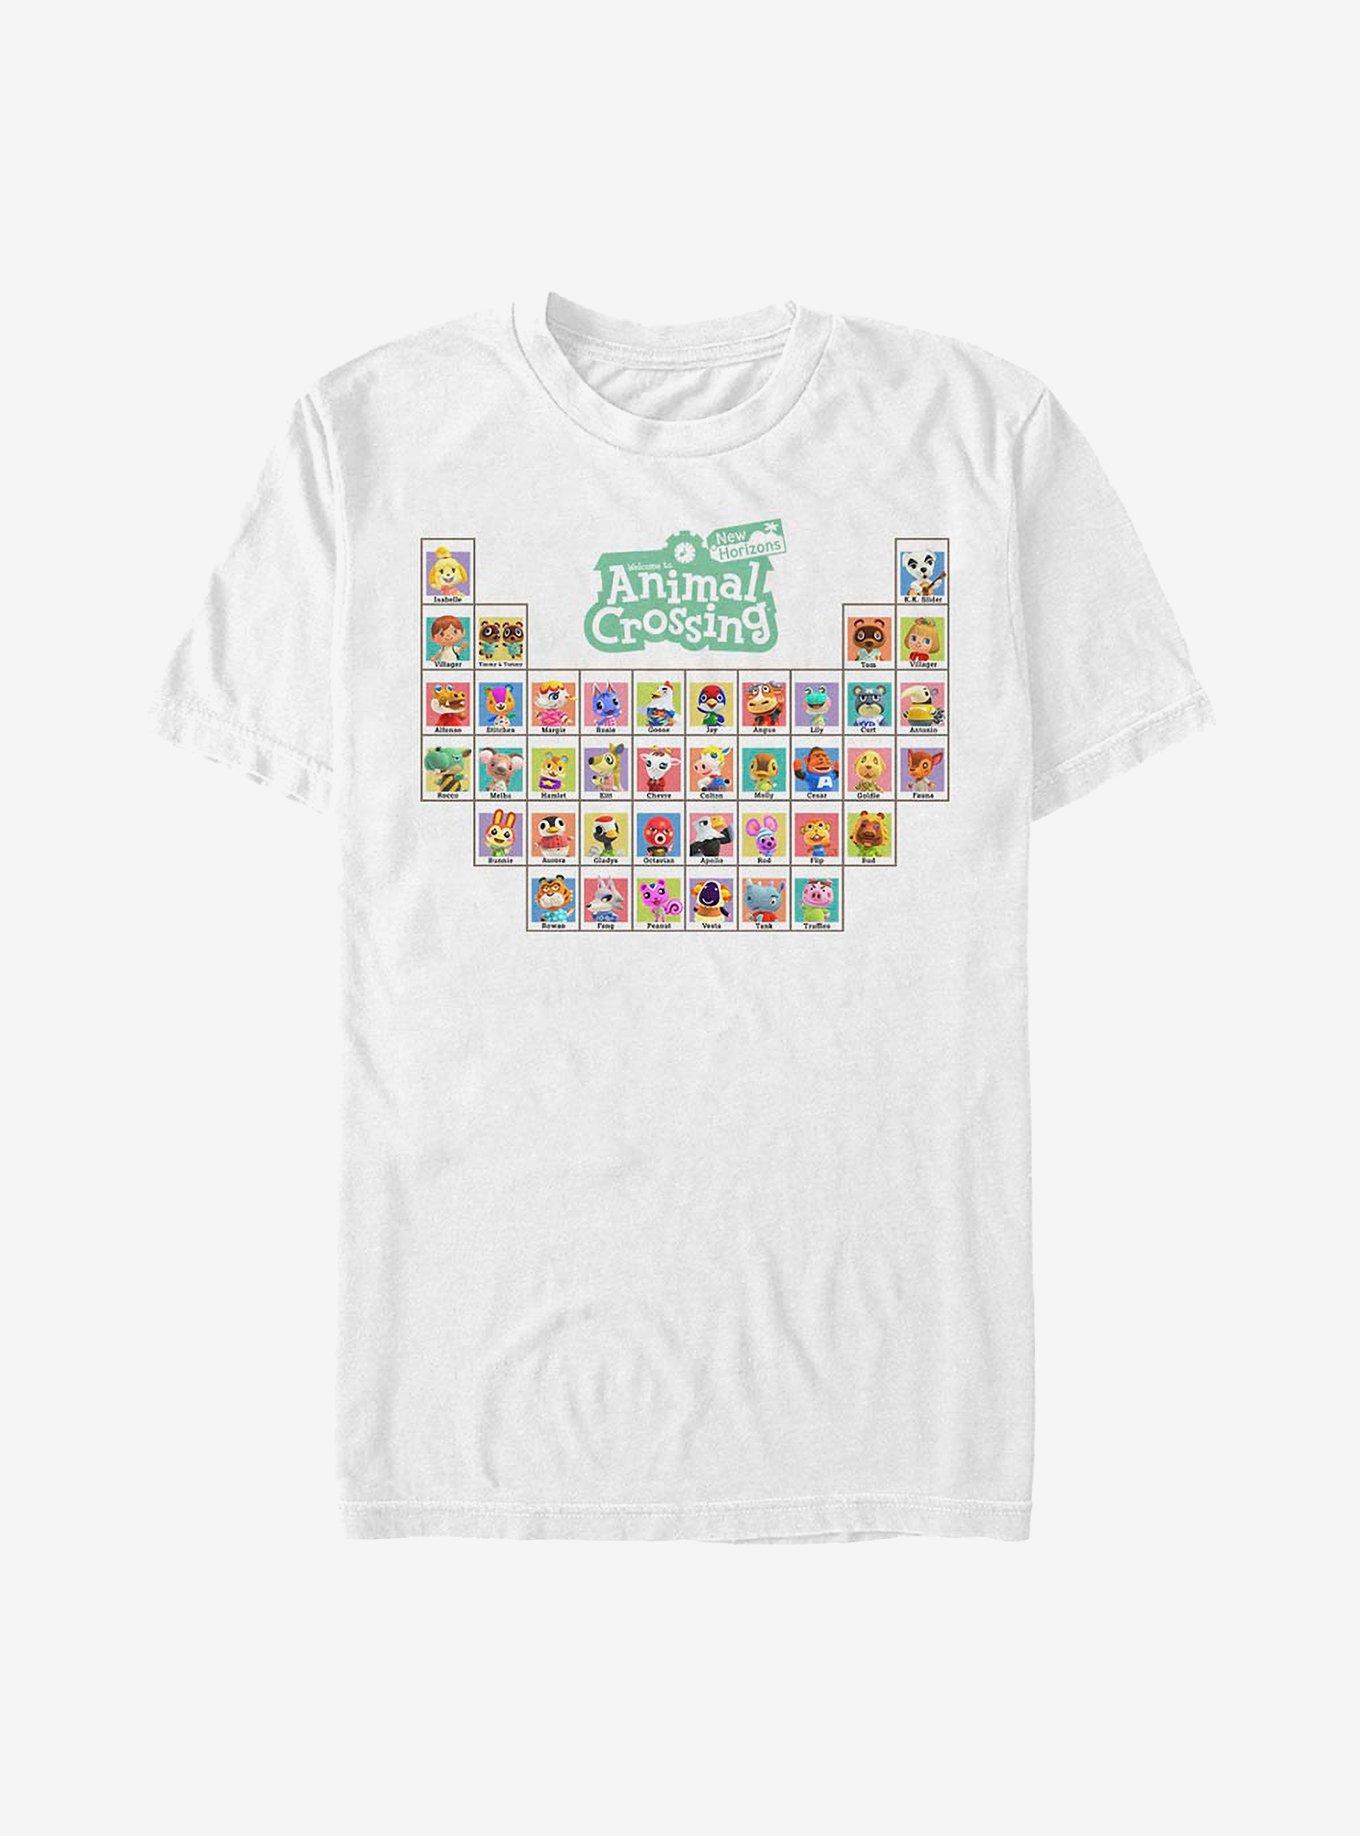 Animal Crossing: New Horizons Table Of Villagers T-Shirt